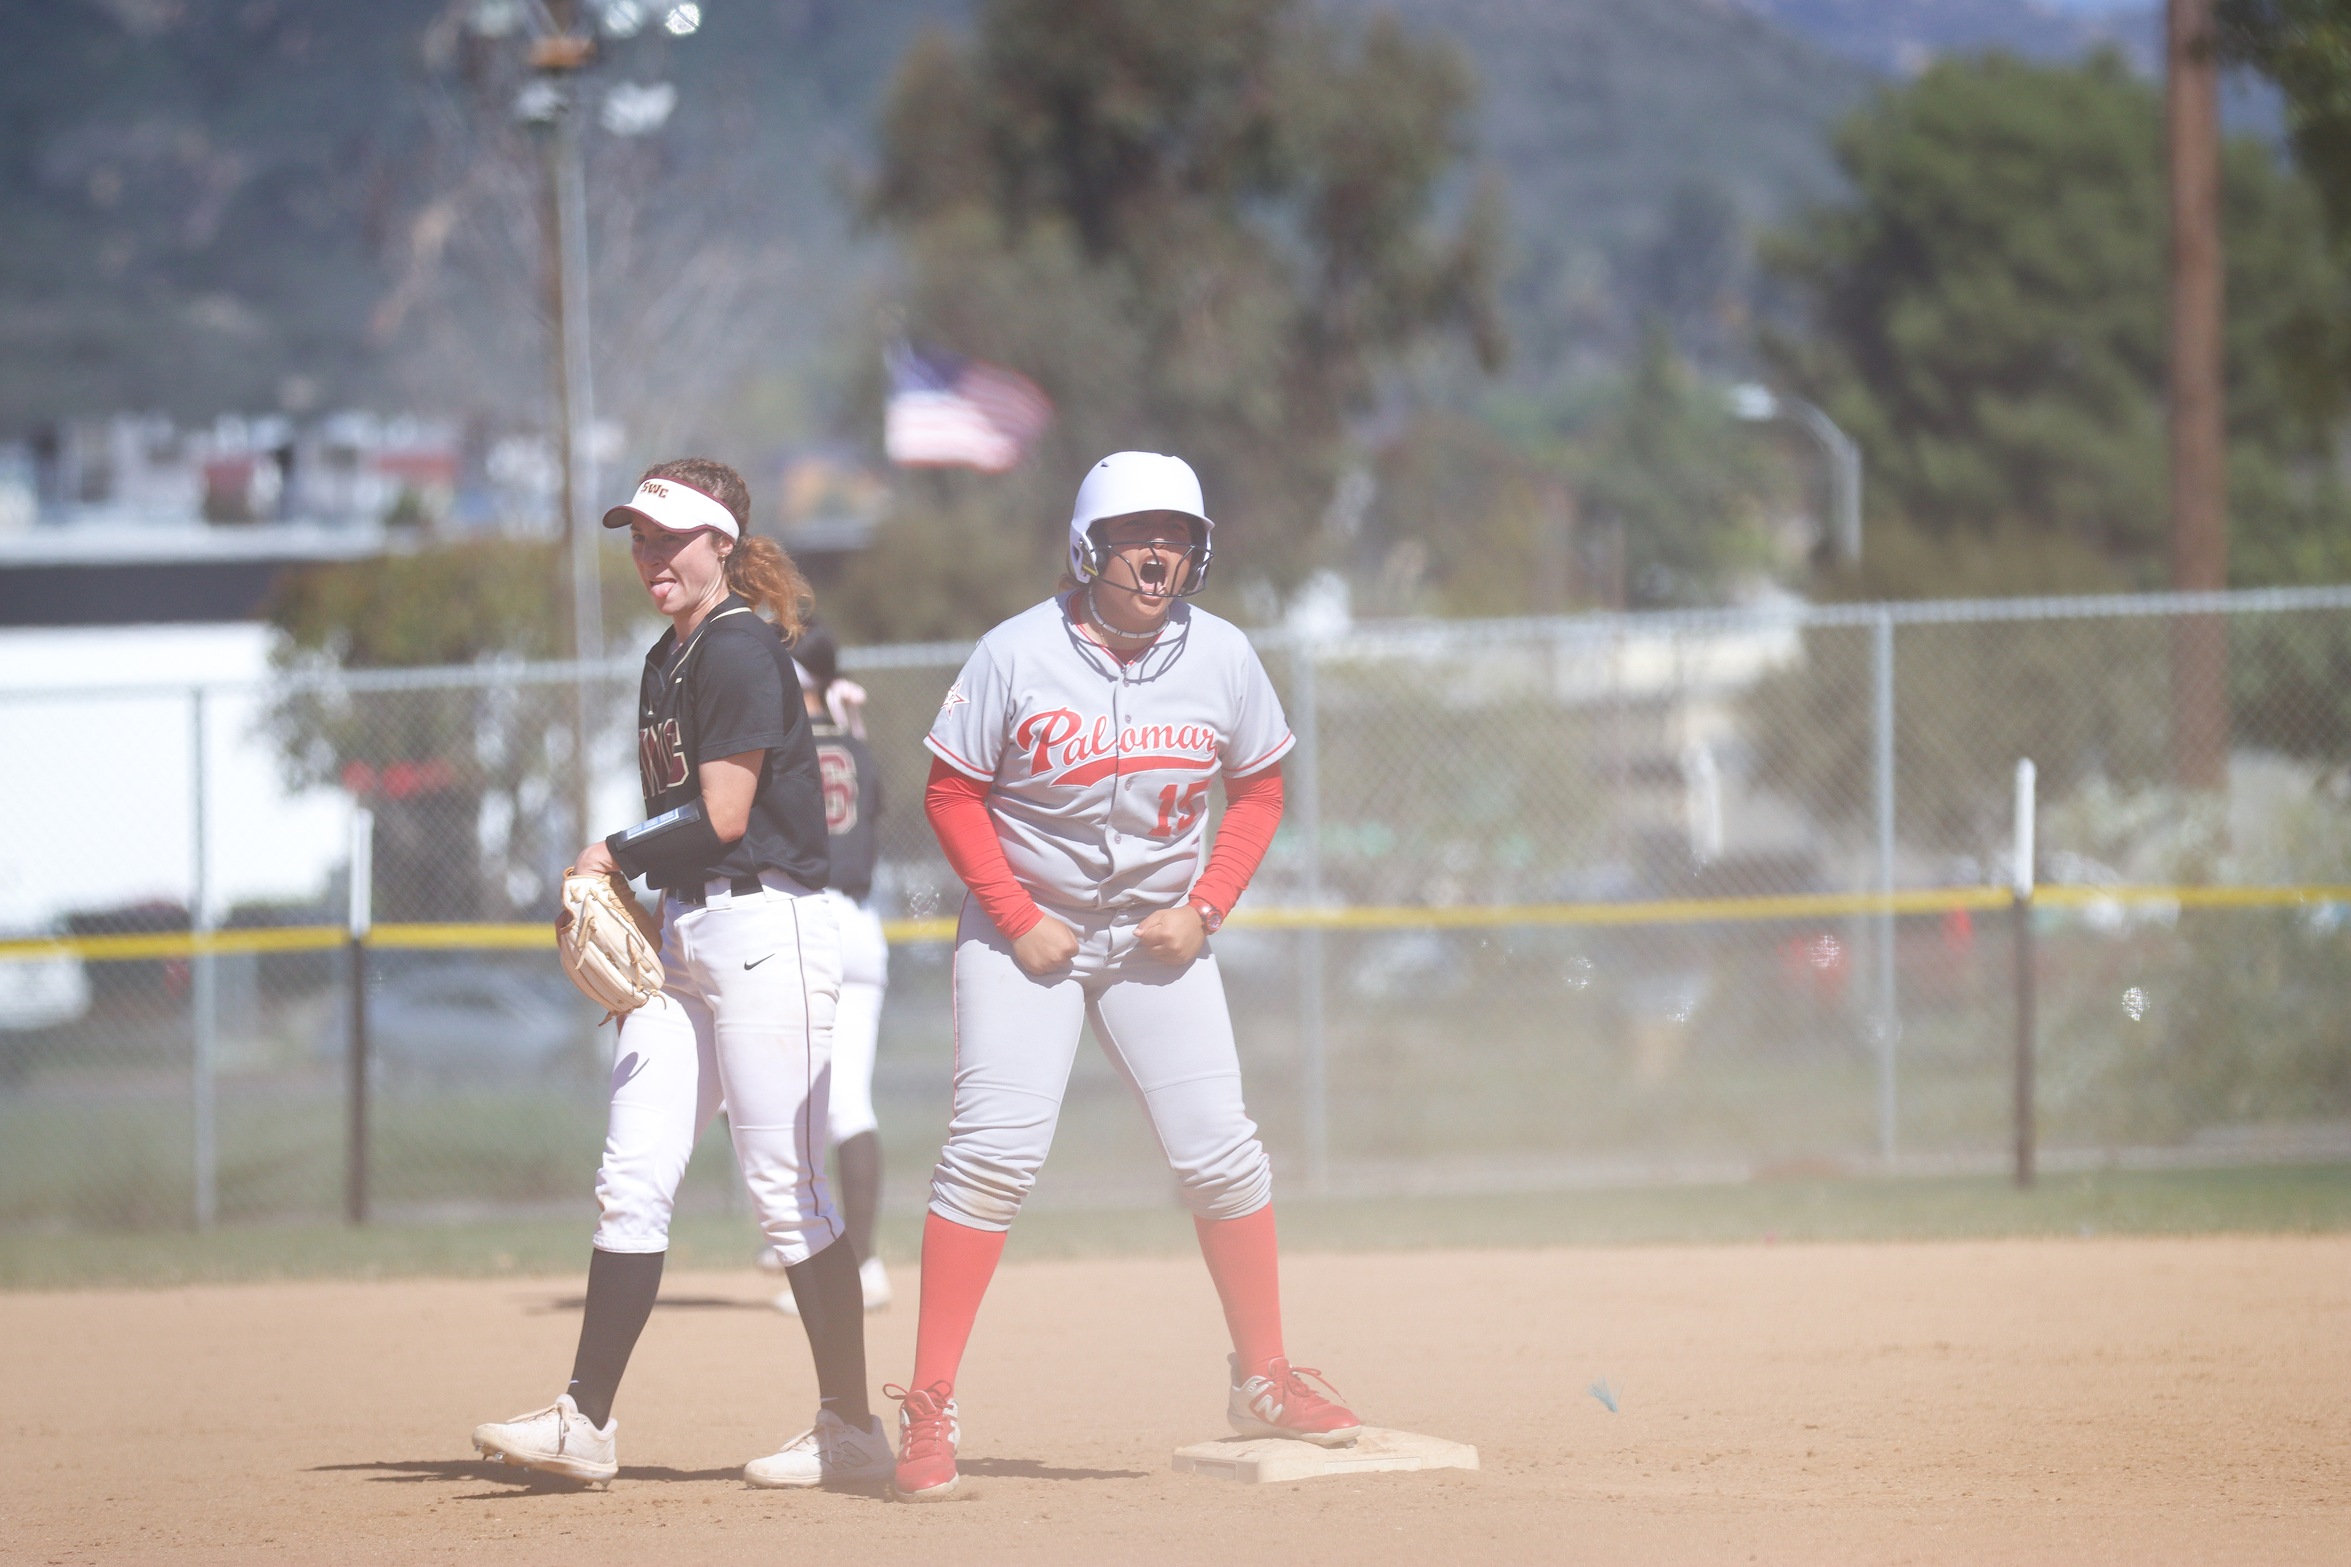 Itzell De Los Rios hit her second home run of the season on Friday. Photo by Cara Heise.